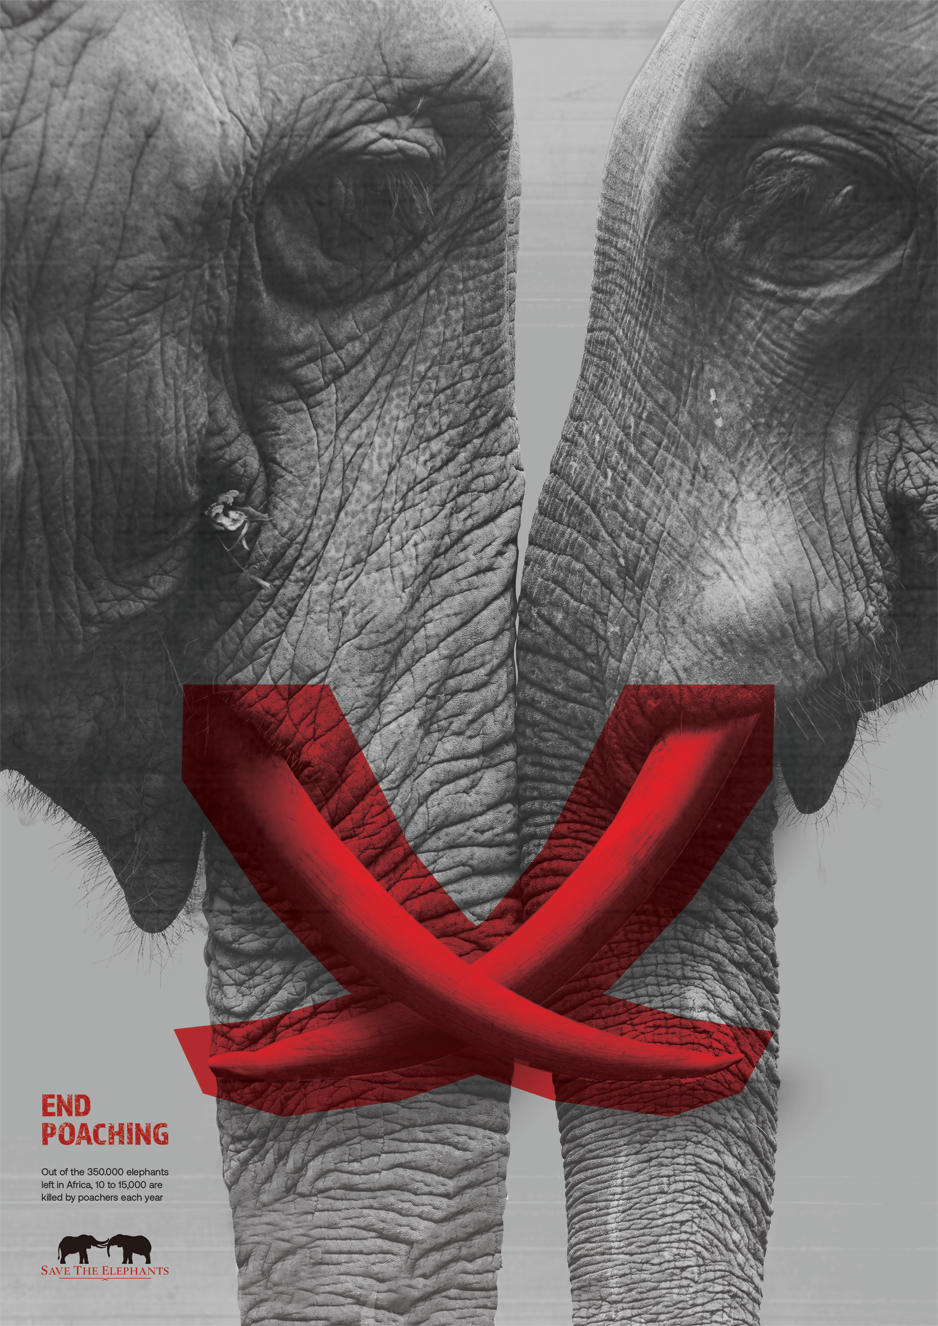 Social issue poster against elephant poaching 